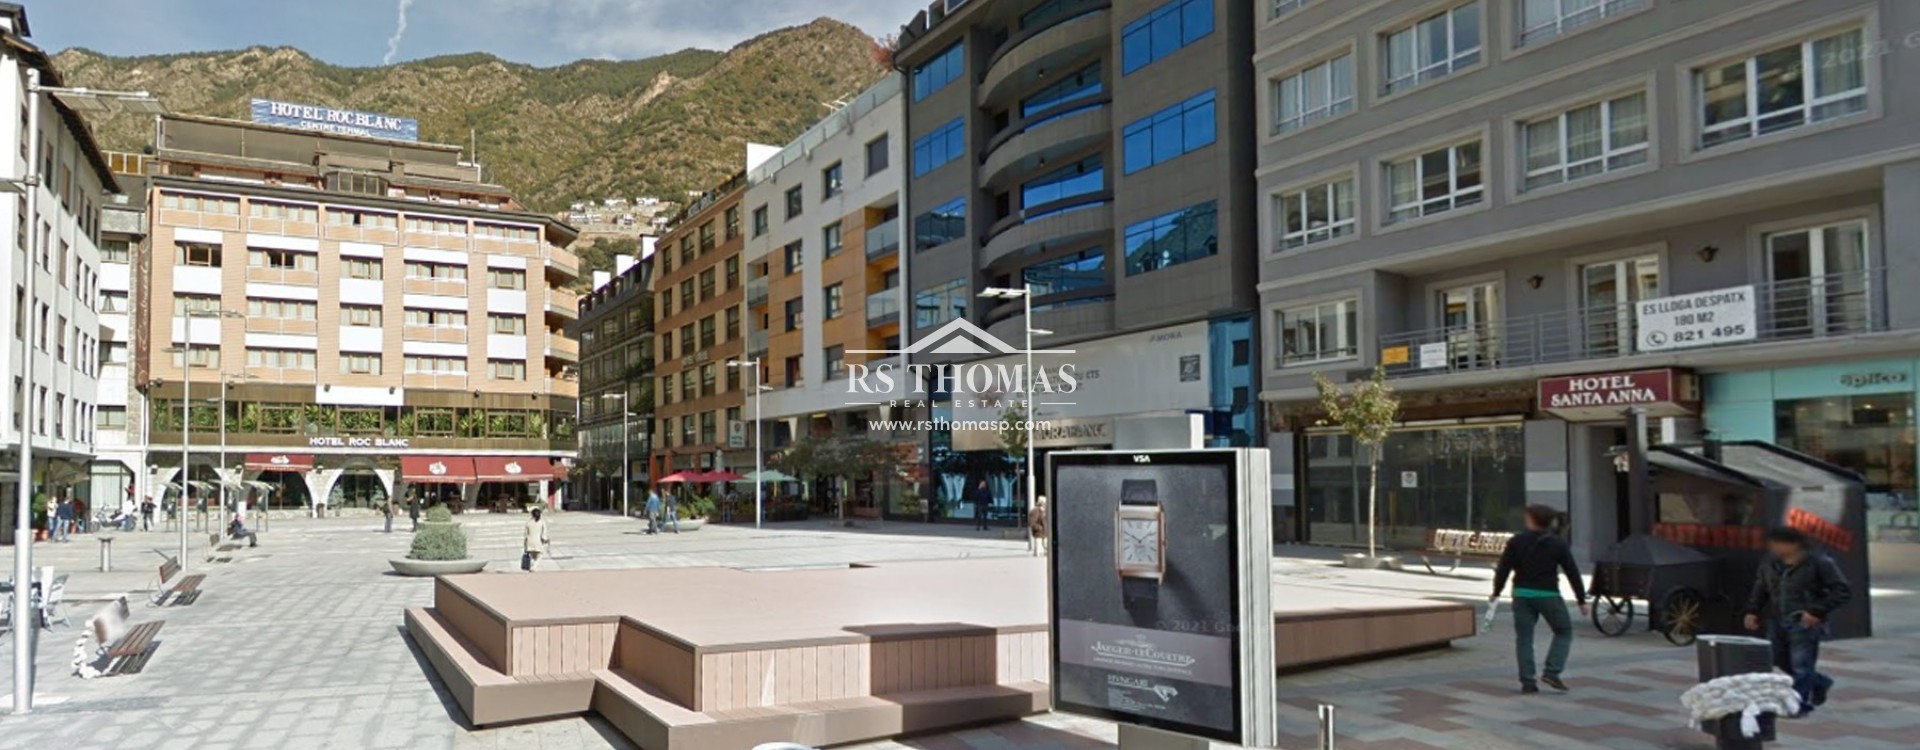 Local commercial for rent in Escaldes-Engordany